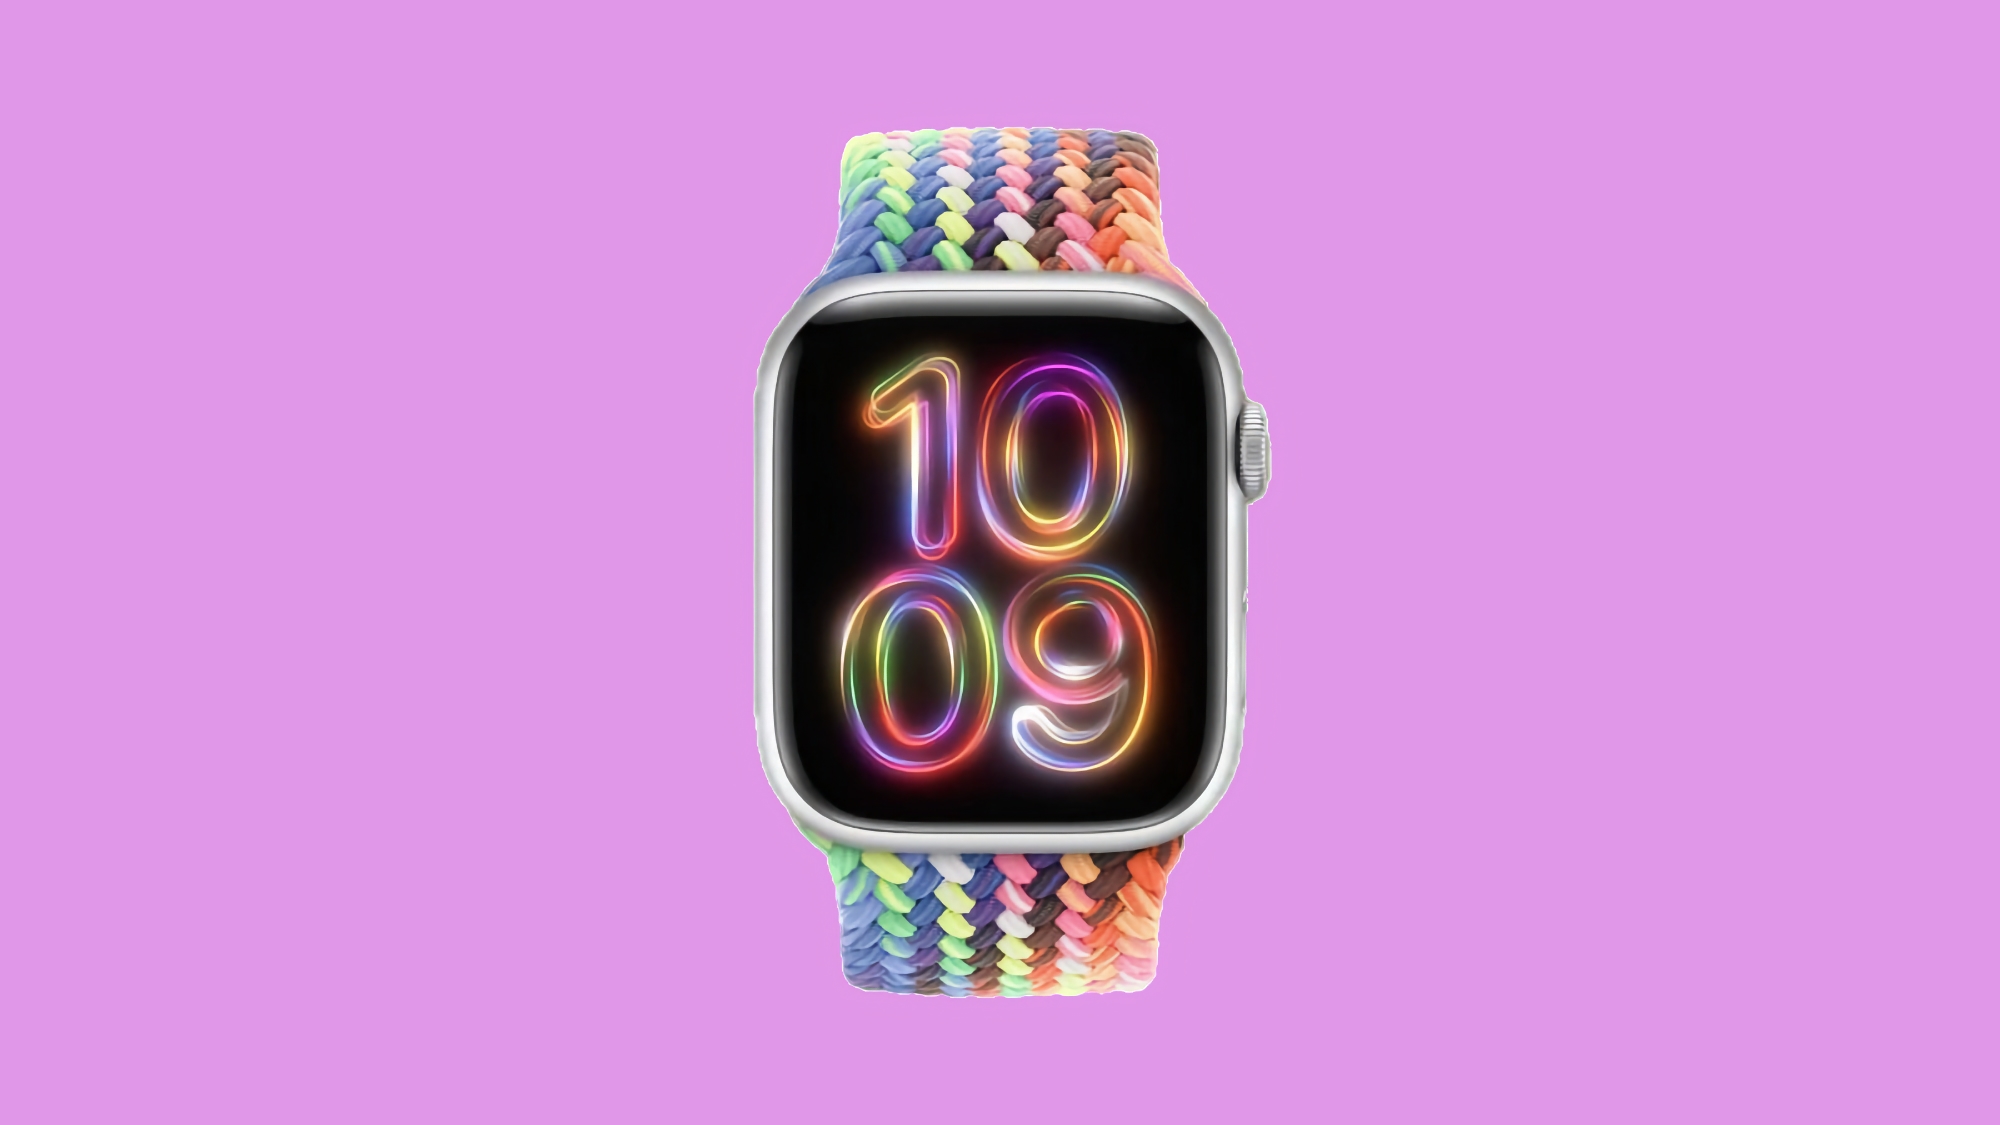 Apple Watch with watchOS 10.5 update gets a new watch face